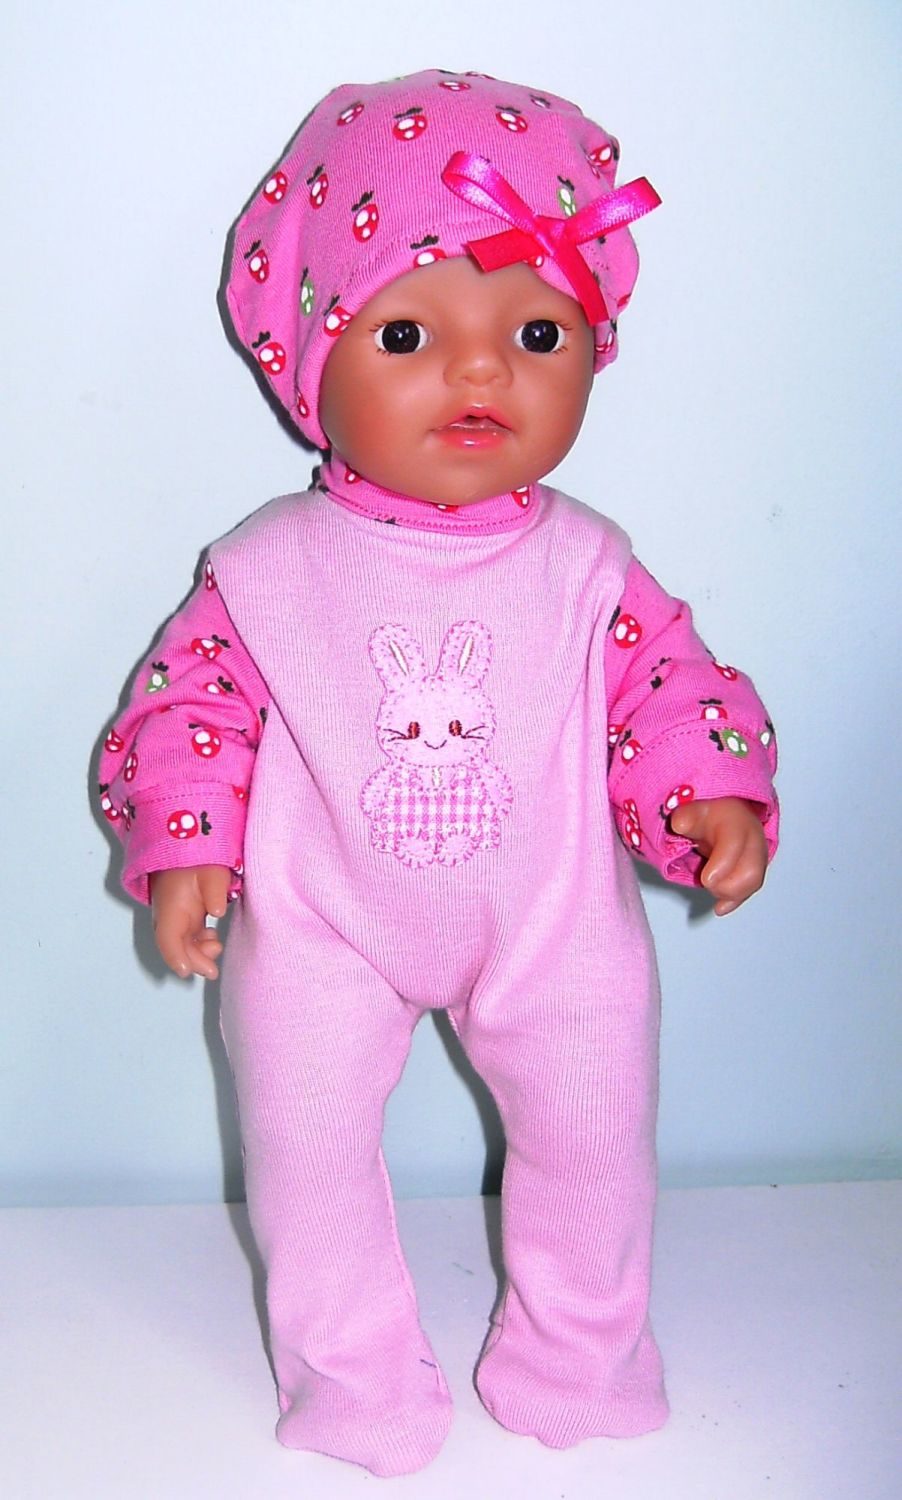 Doll's pink and strawberry print sleepsuit to fit a 12 inch high baby doll